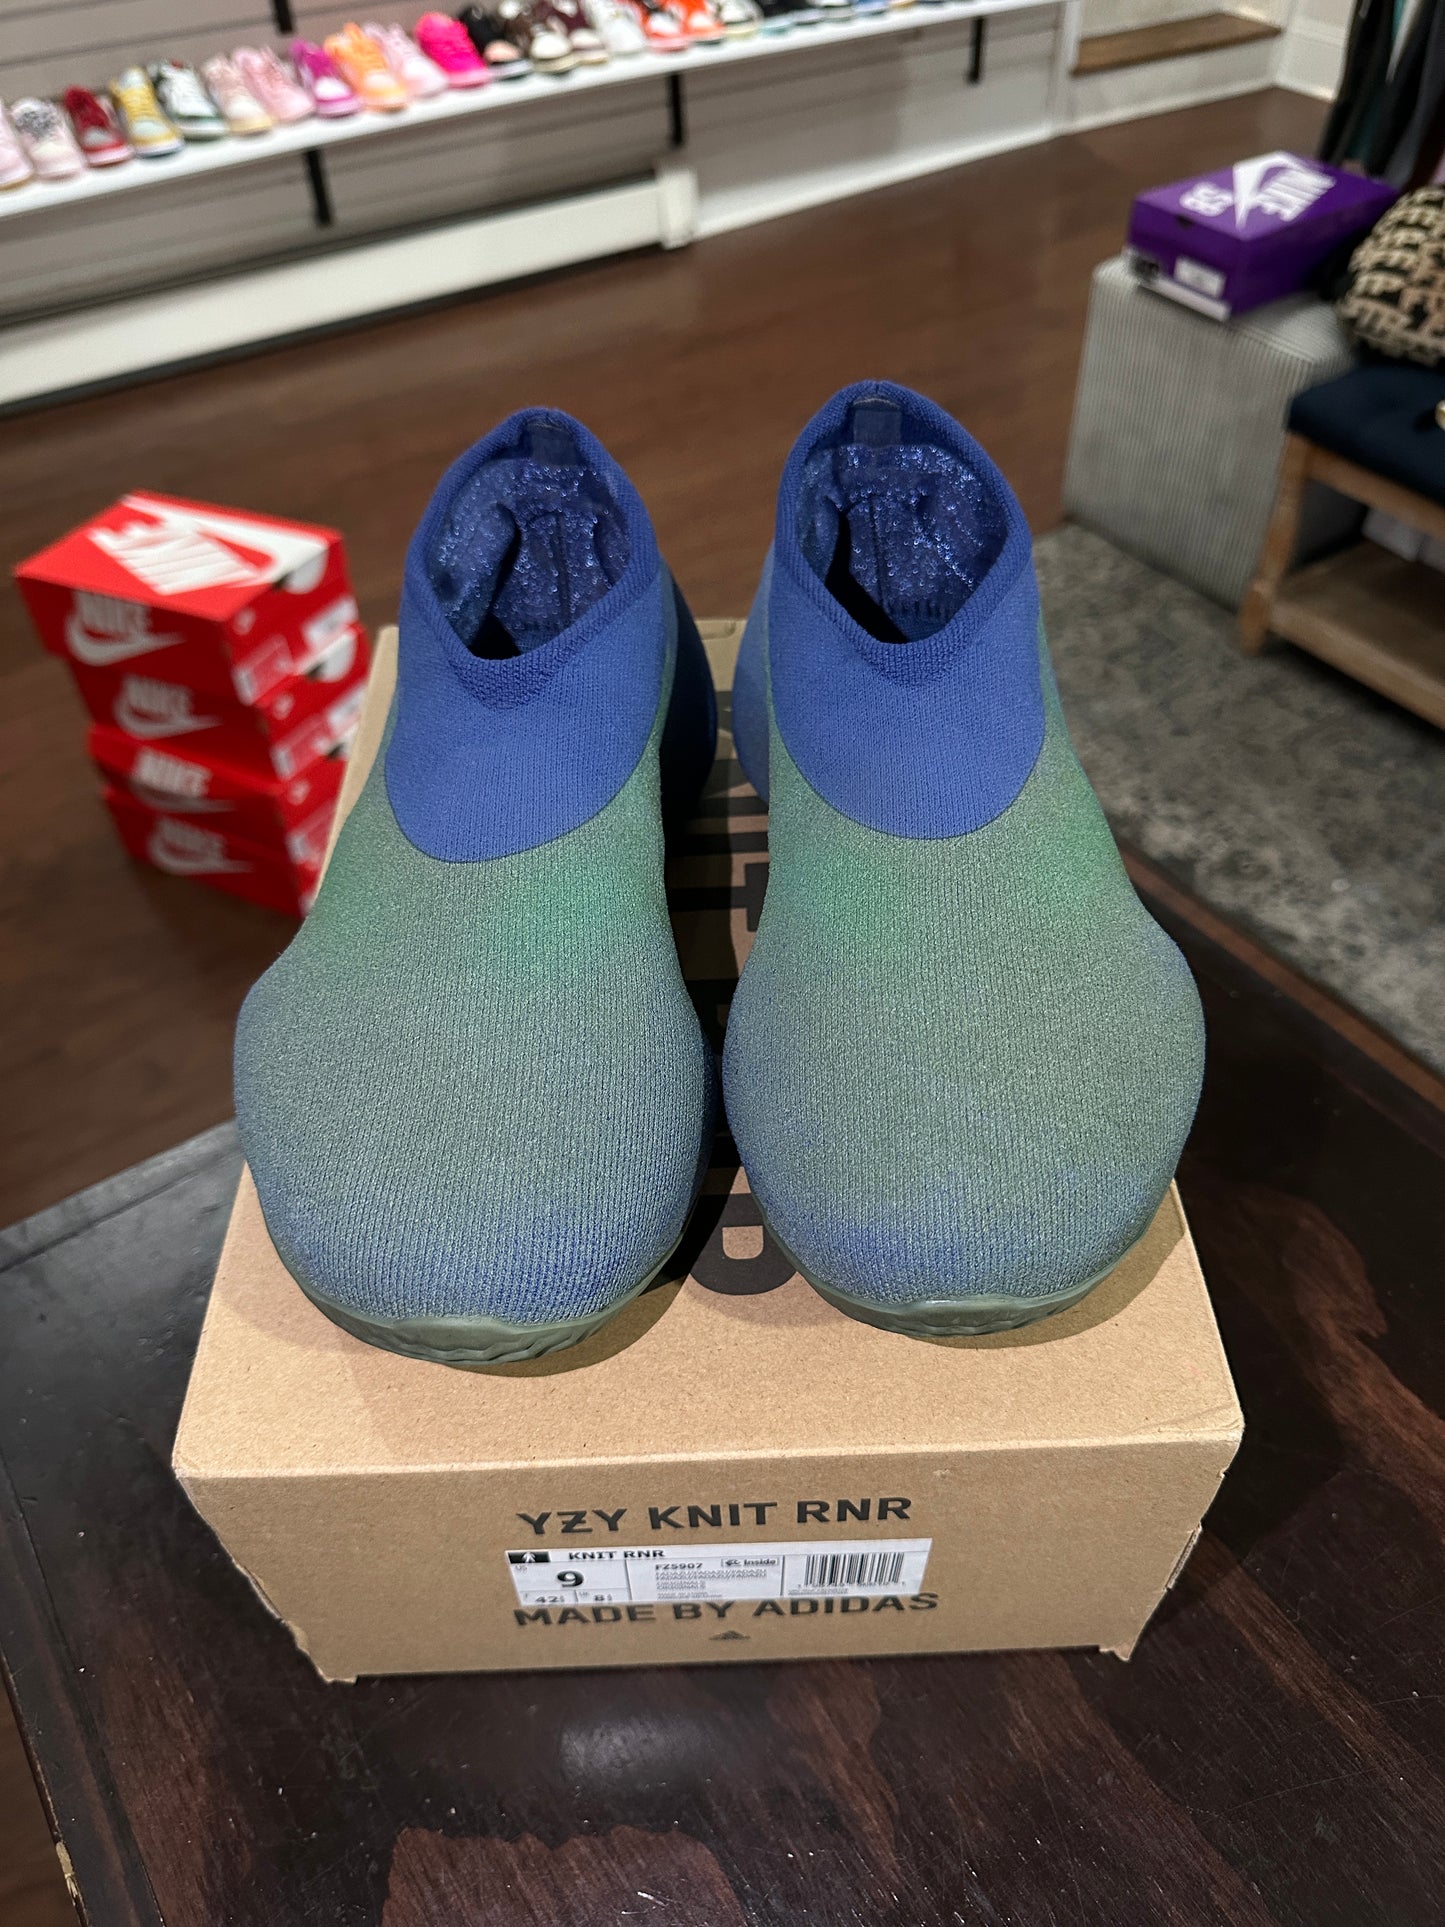 *USED* Yeezy Knit Runner Faded Azure (size 9)